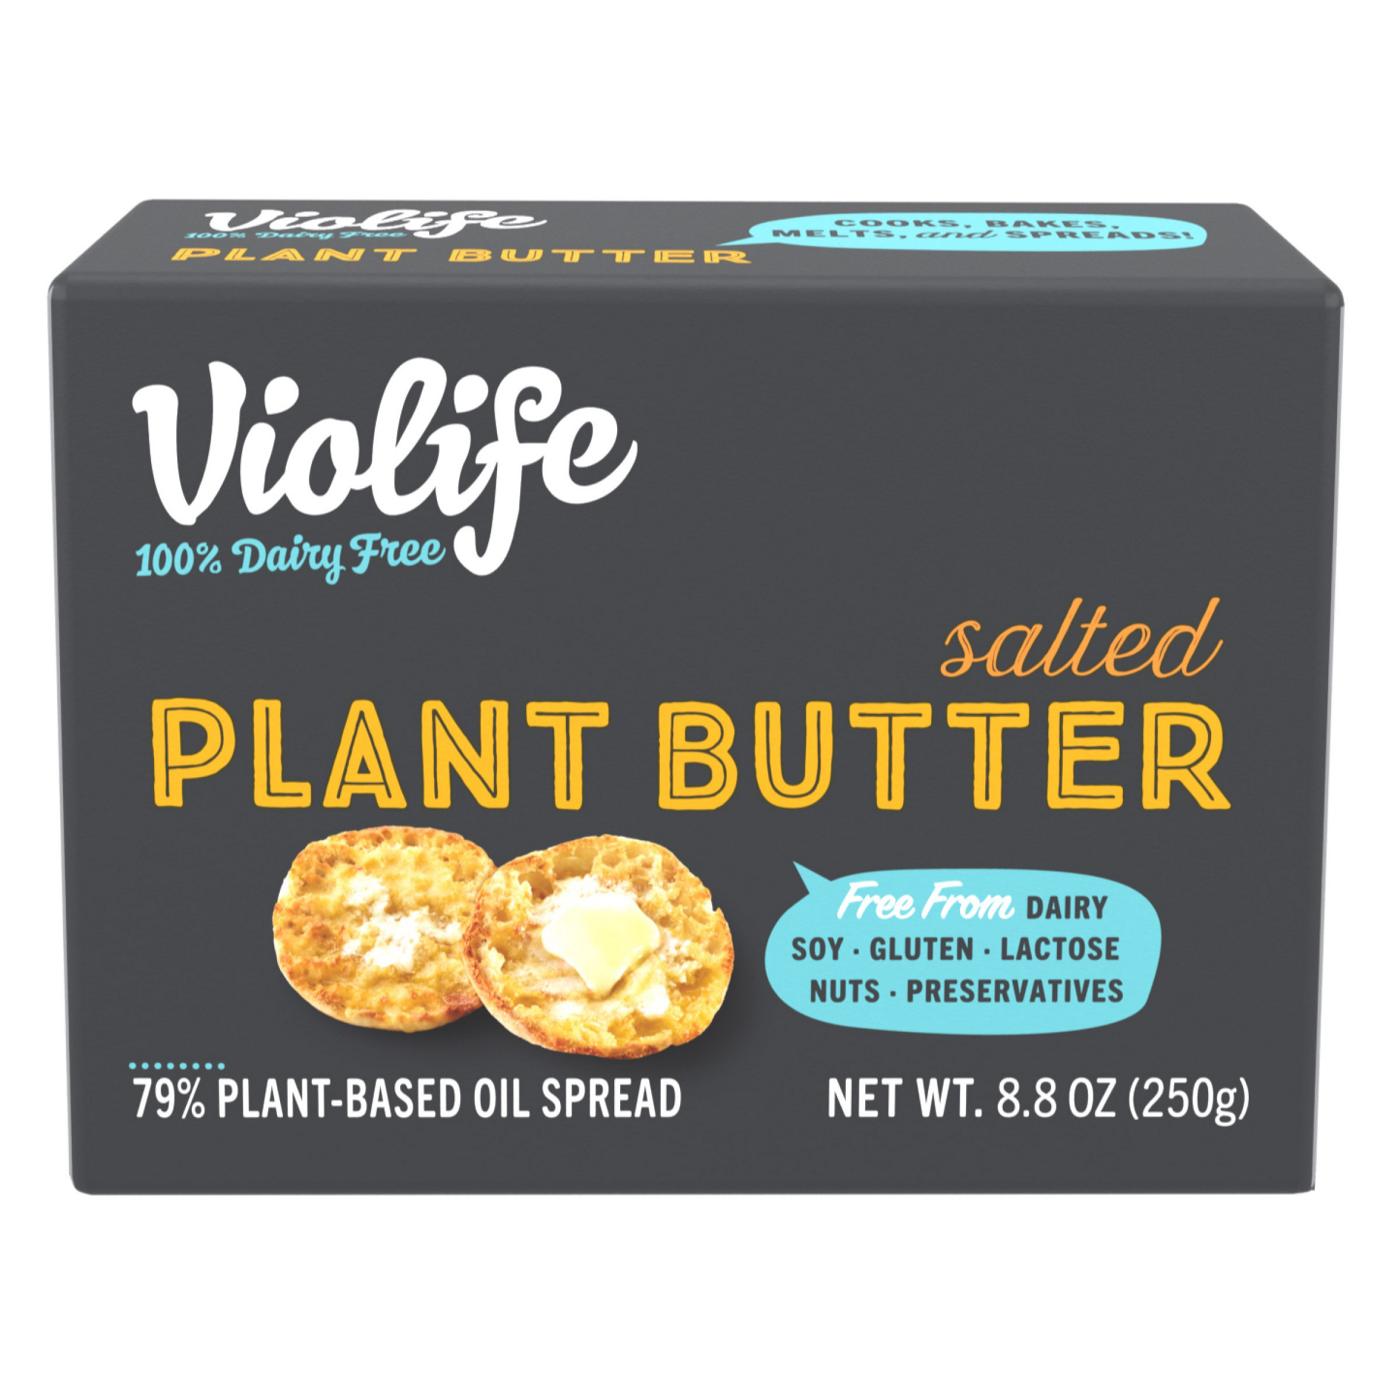 Violife Plant Butter Salted Dairy-Free Vegan; image 6 of 10